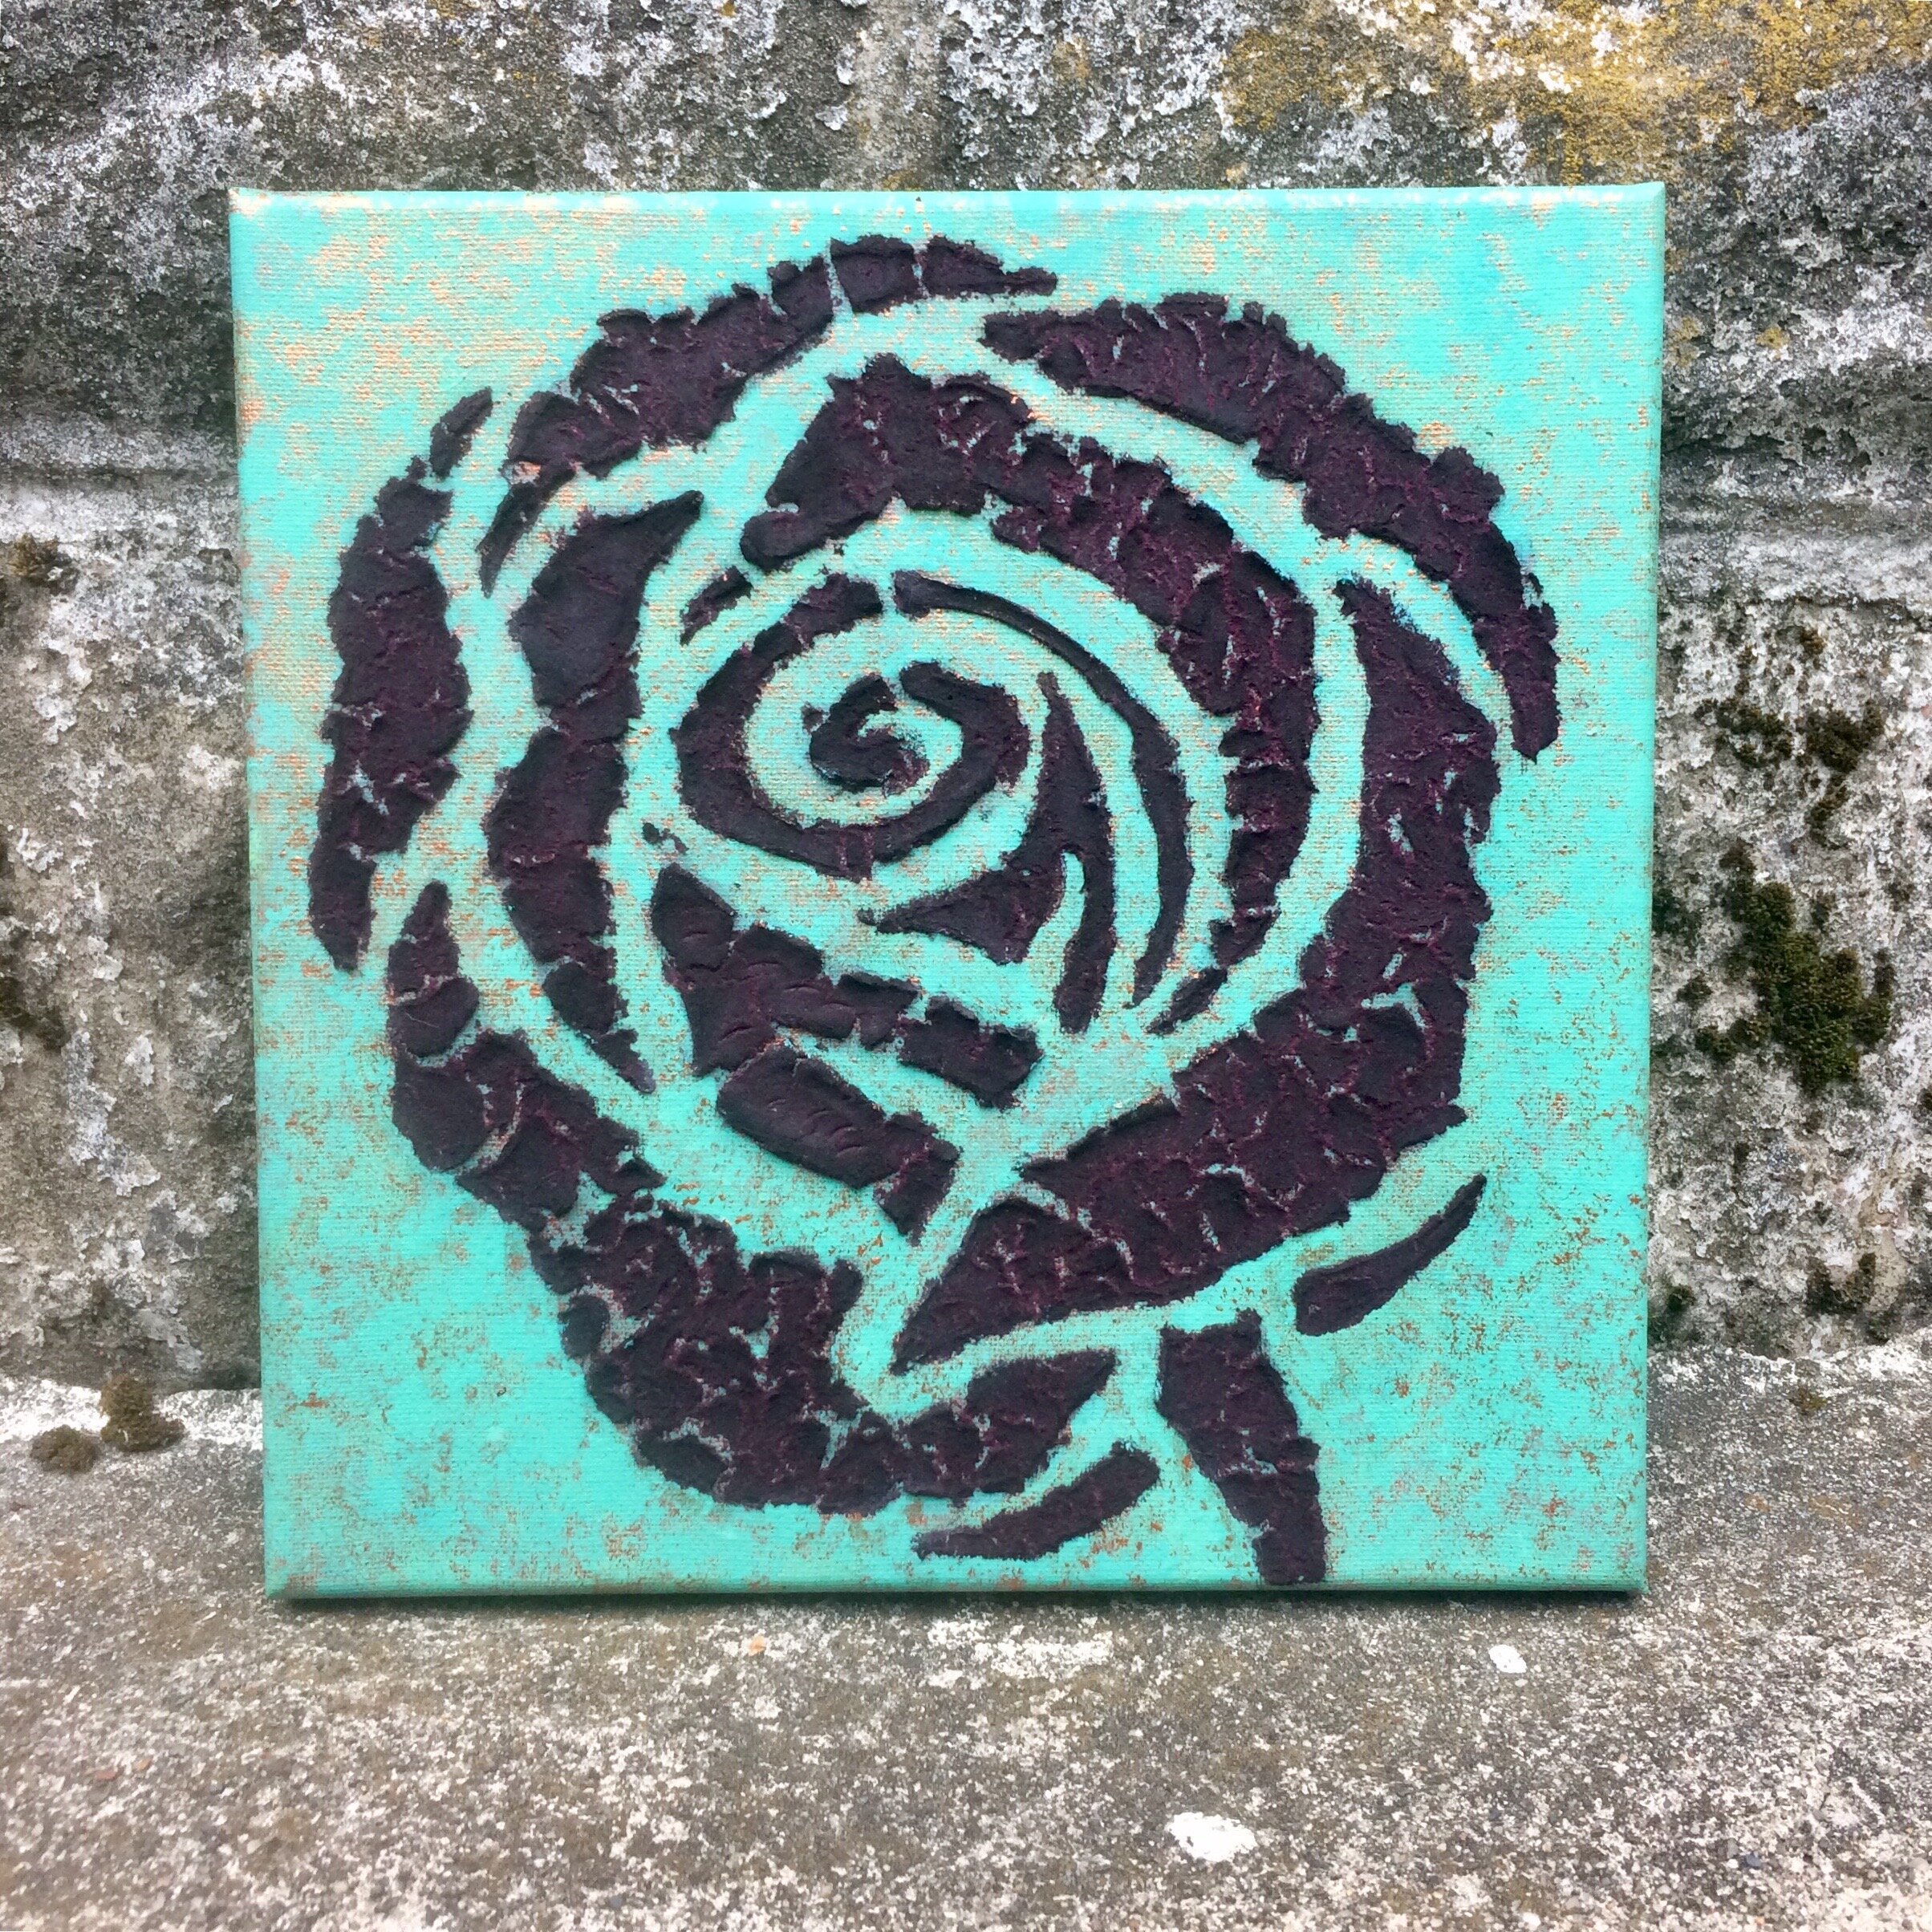  Rose  Acrylic and rose petal clay on canvas 